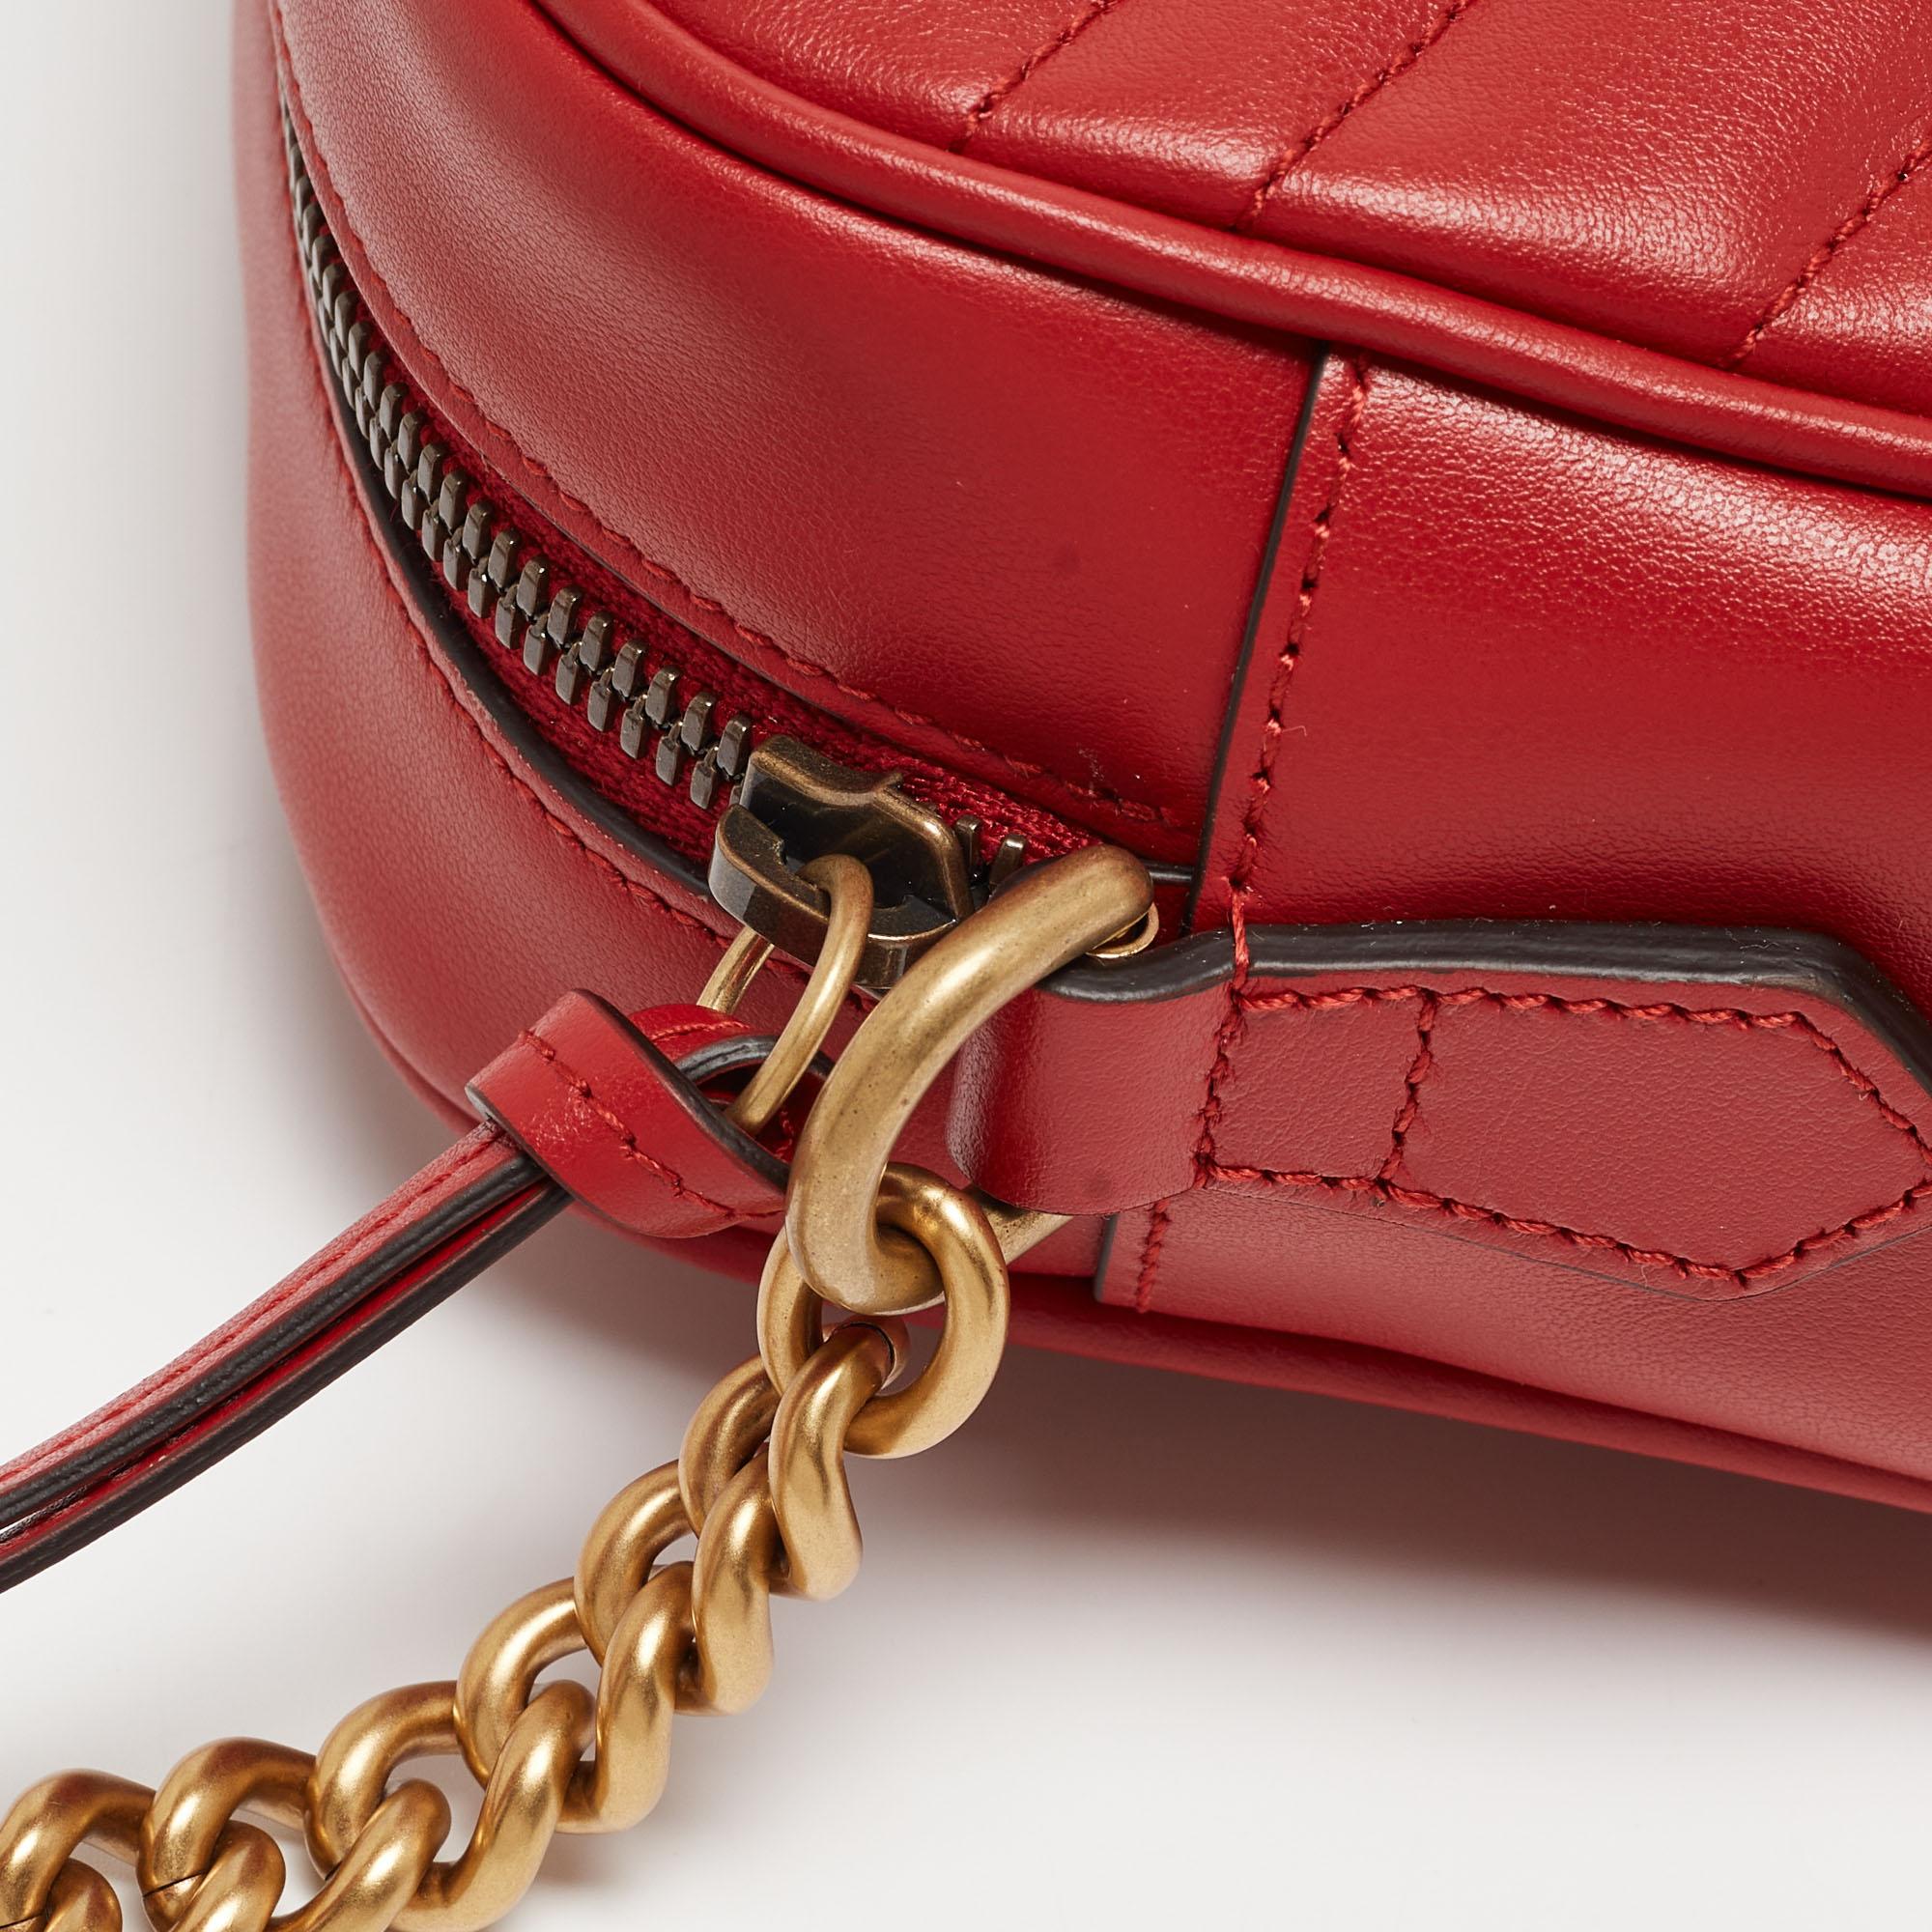 Gucci Red Matelassé Leather Small GG Marmont Shoulder Bag 5